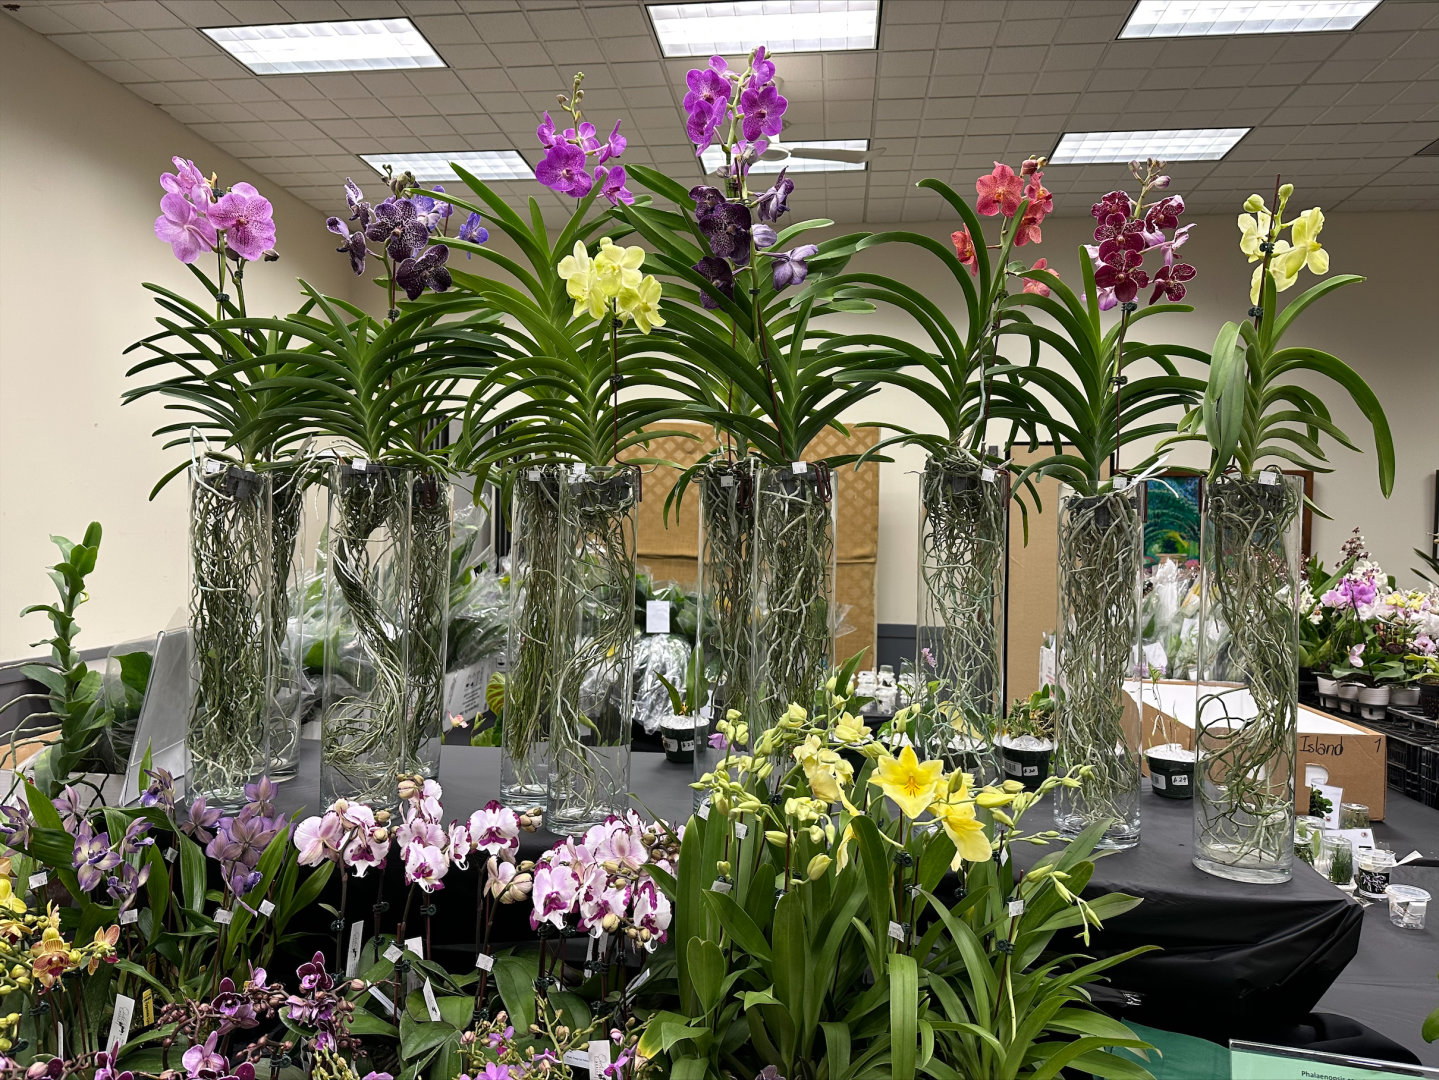 Long Island Orchid Festival being held this weekend at Planting Fields